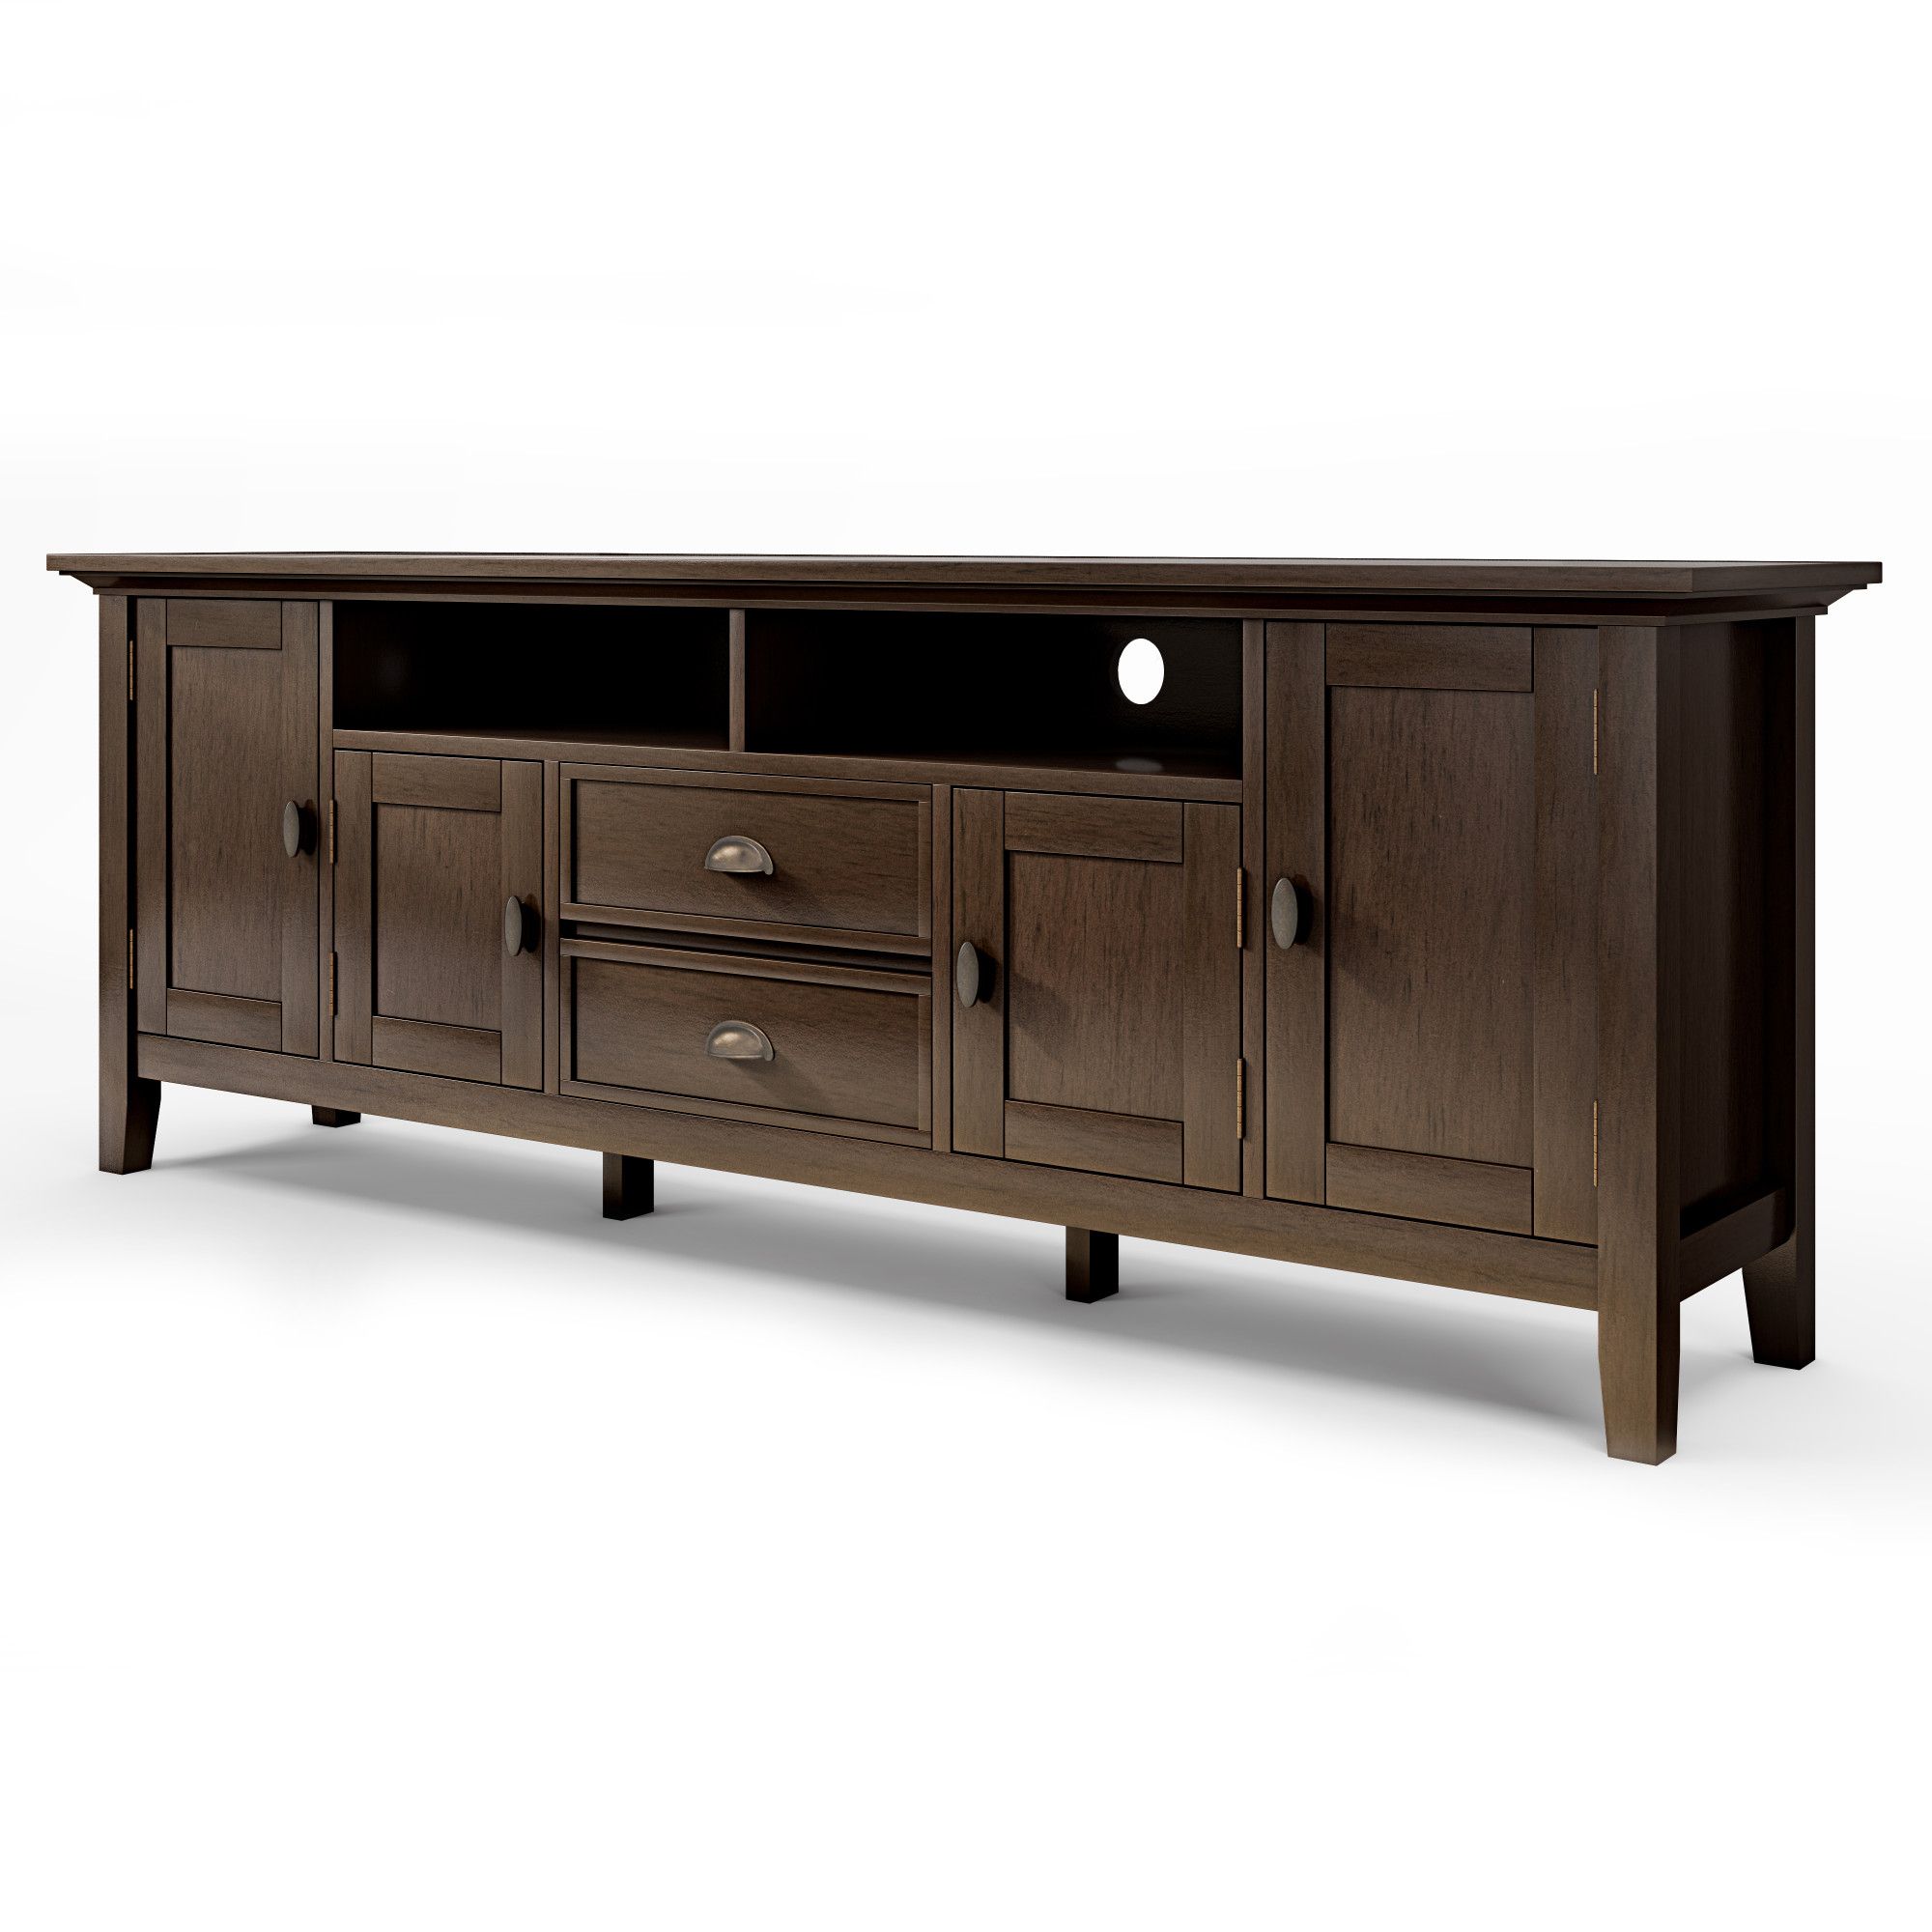 Brooklyn + Max Stanwick Solid Wood 72 Inch Wide Rustic Tv Throughout Bromley Extra Wide Oak Tv Stands (View 7 of 20)